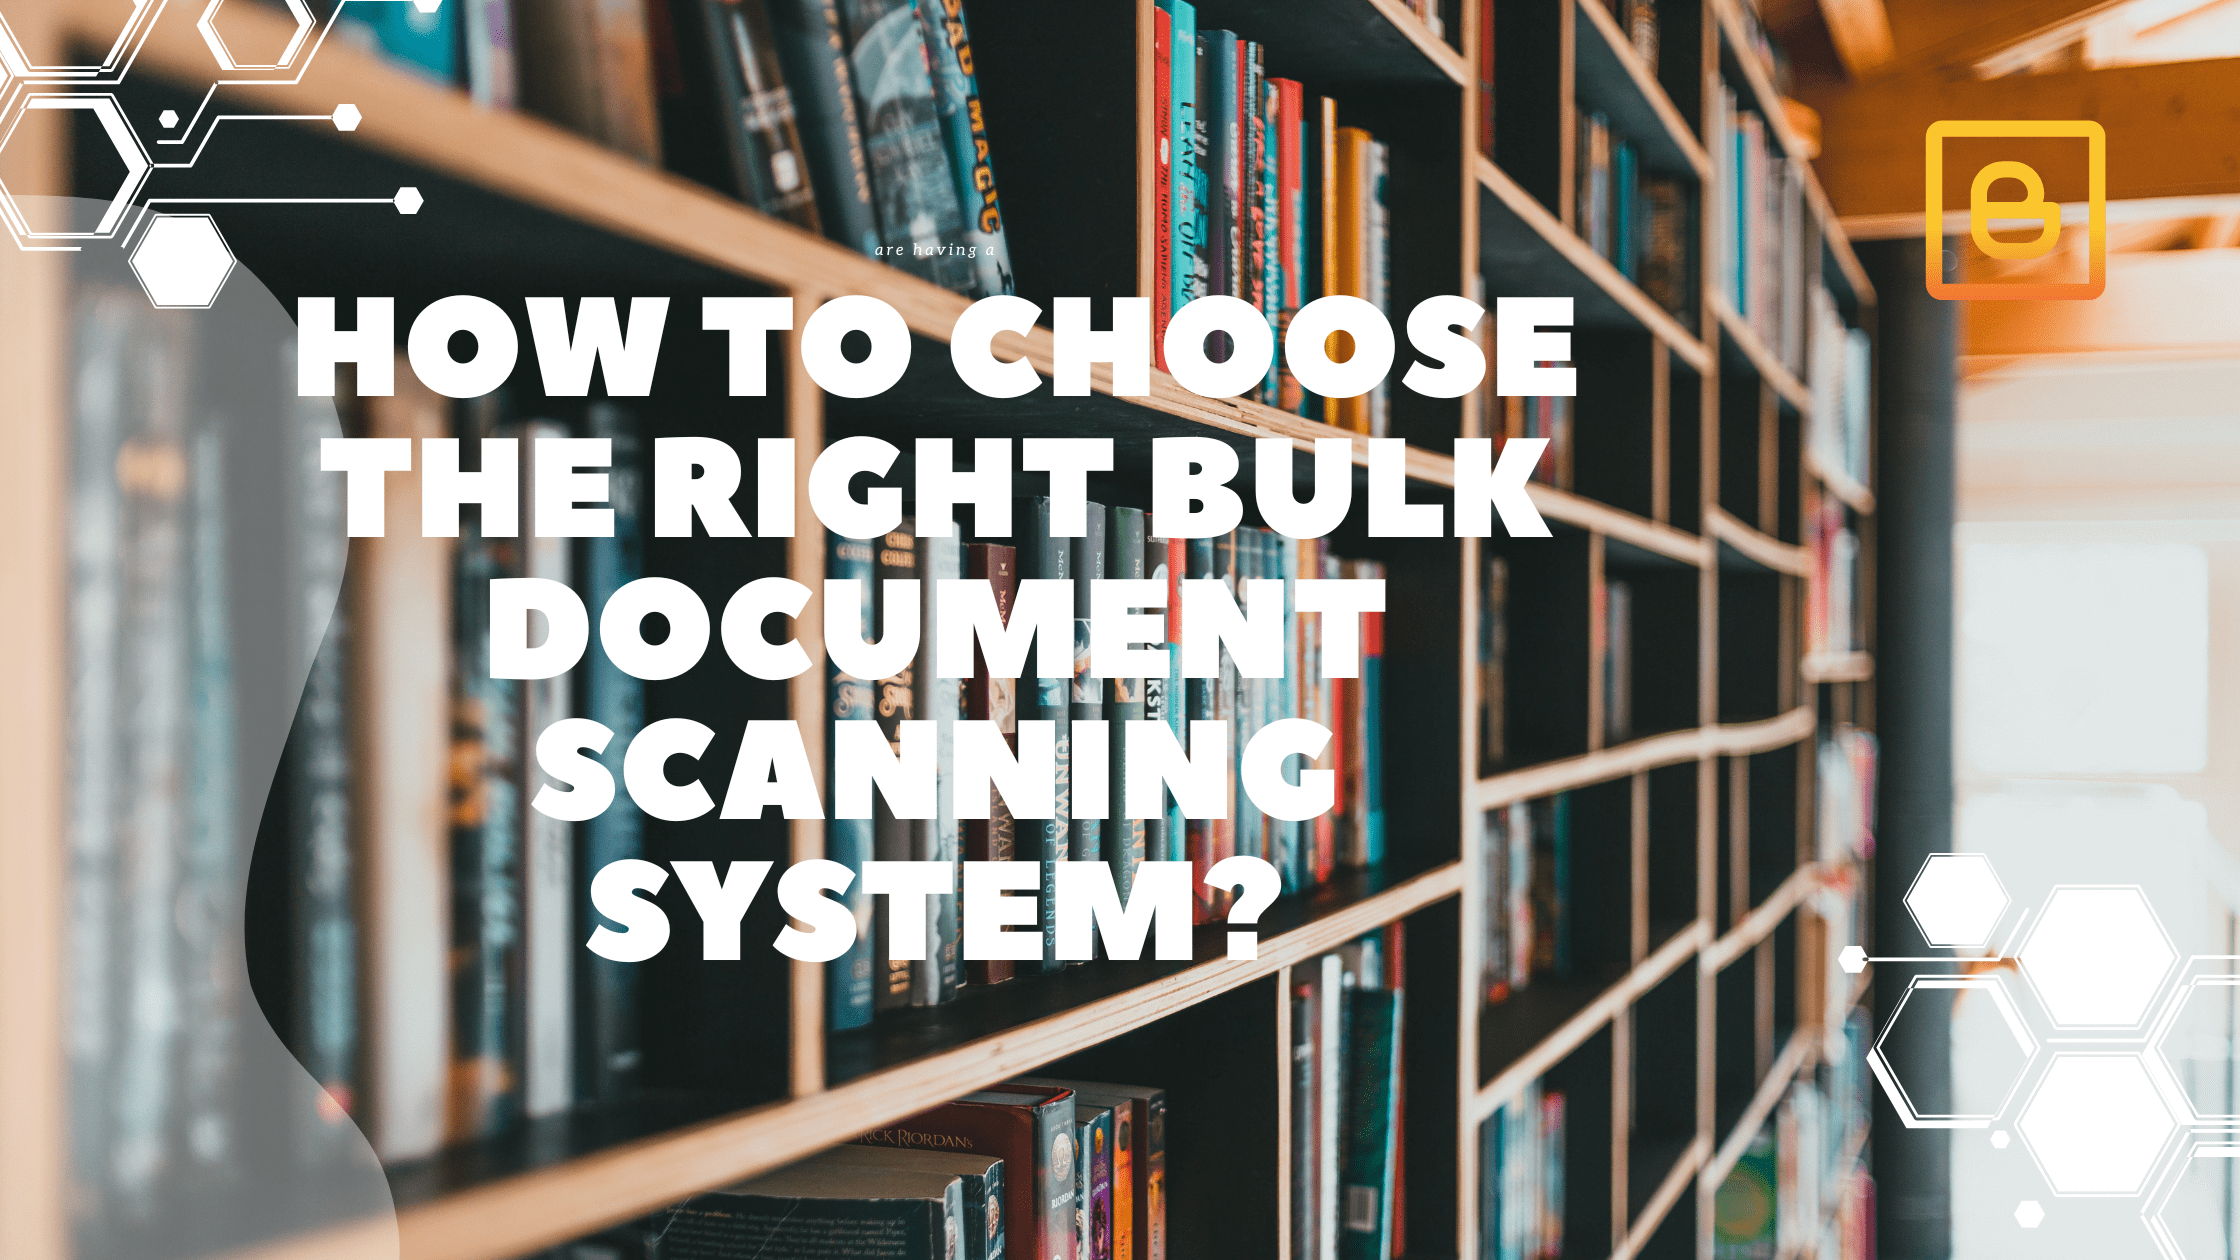 How to choose the right bulk document scanning system?